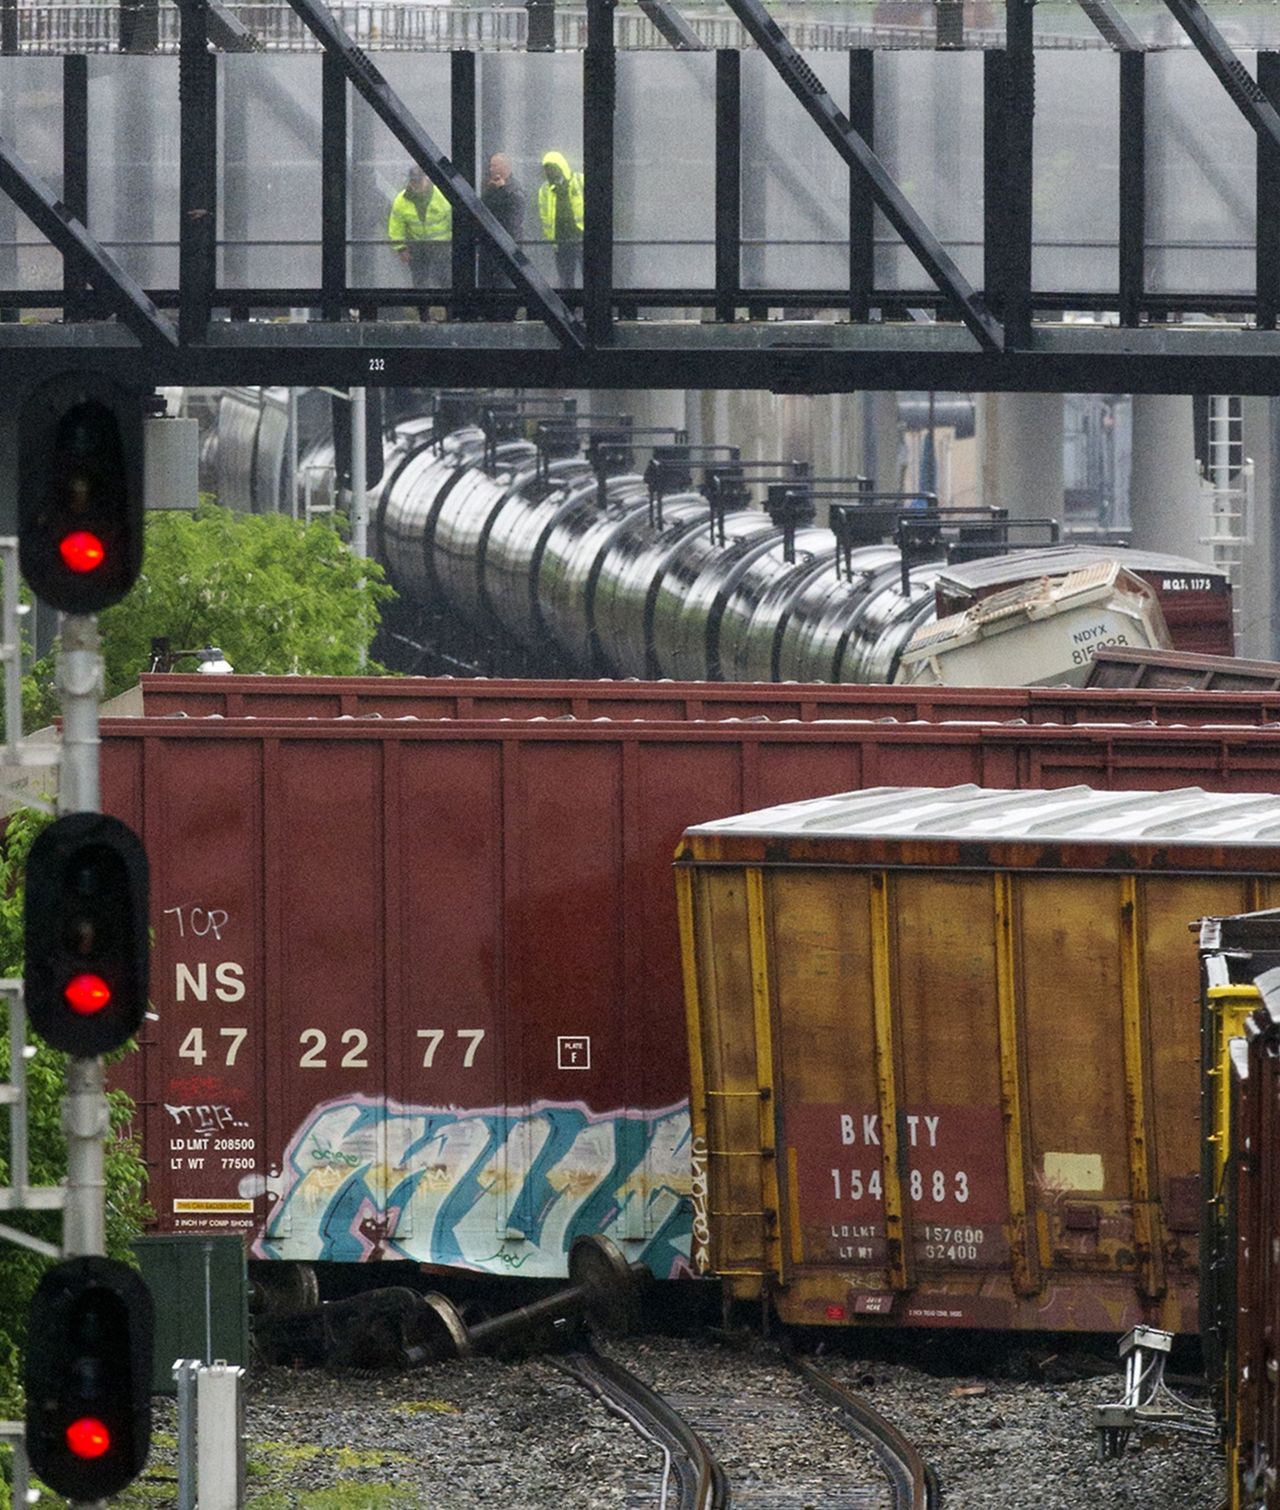 Officials look down from a Metro pedestrian bridge at several overturned train cars after a CSX freight train derailed Sunday near a Metro stop in Washington, D.C.